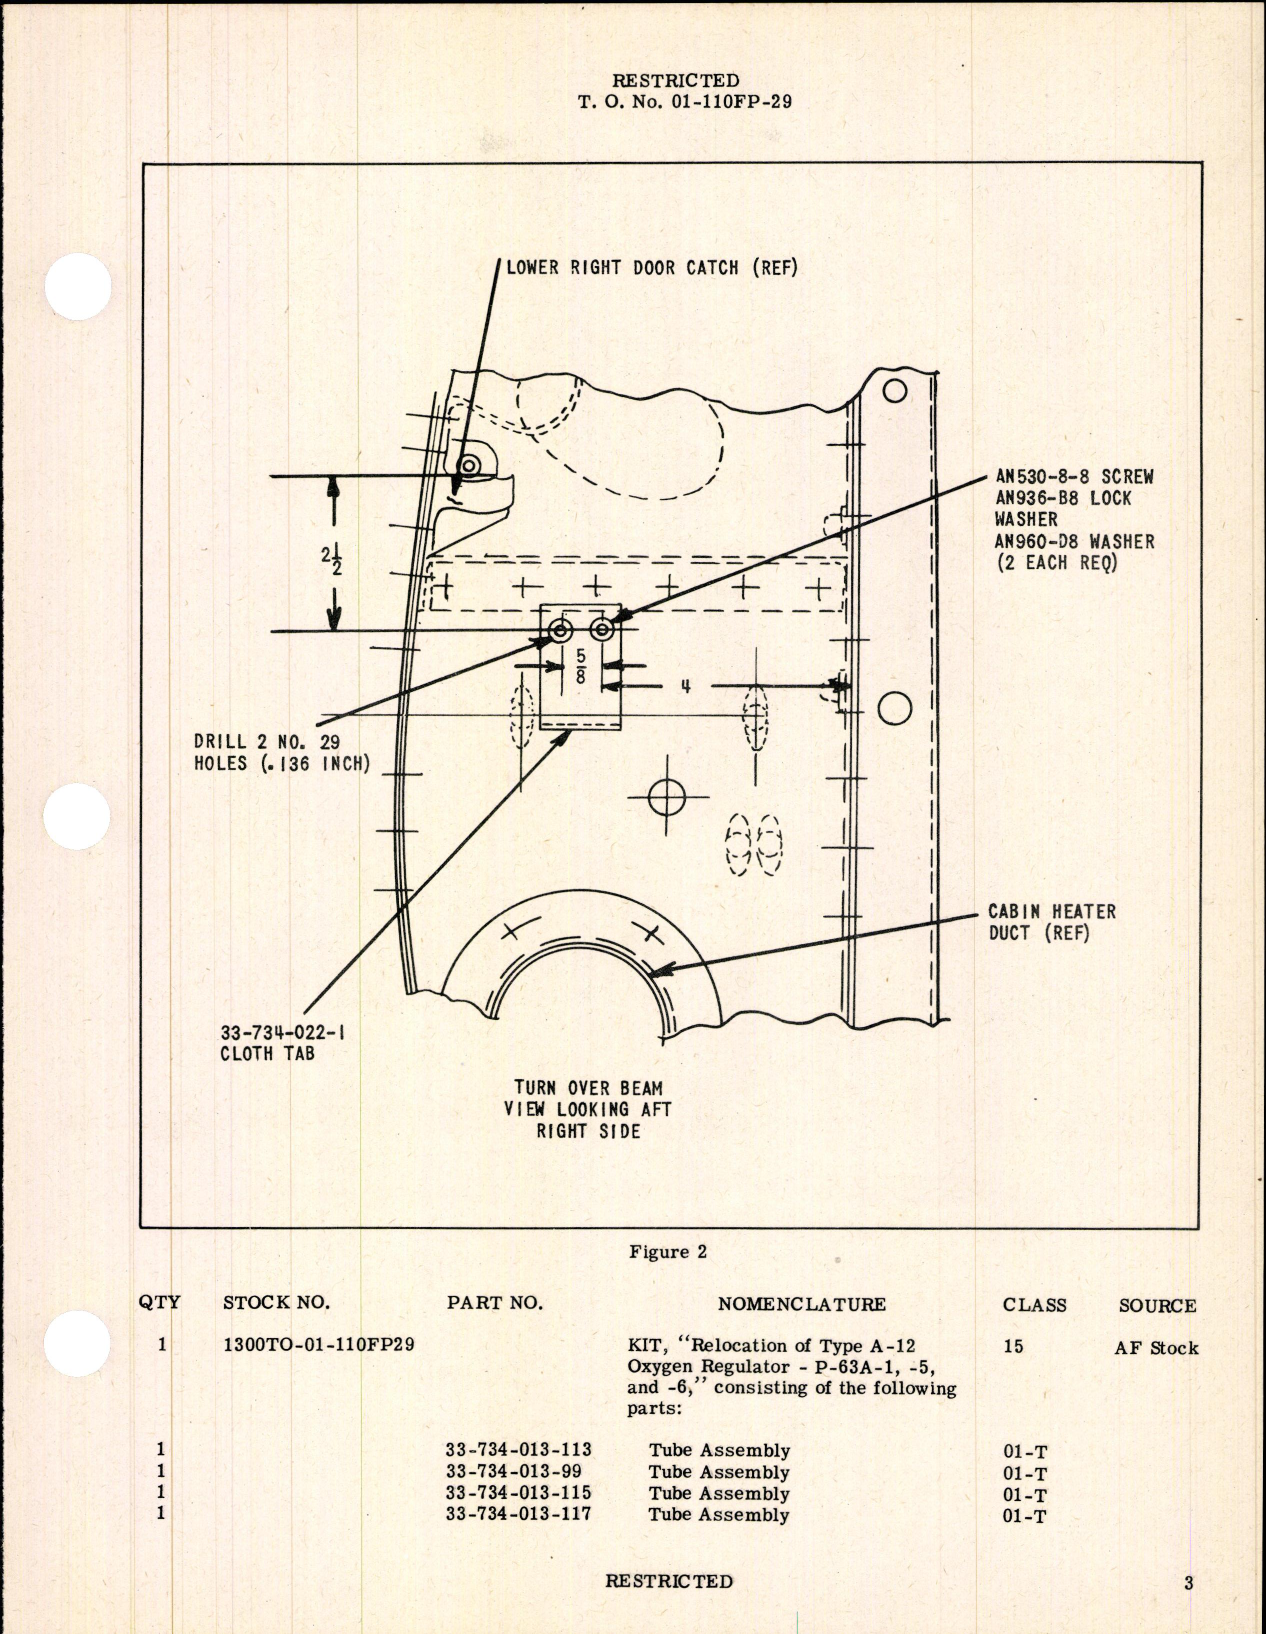 Sample page 3 from AirCorps Library document: Relocation of Type A-12 Oxygen Regulator for P-63A